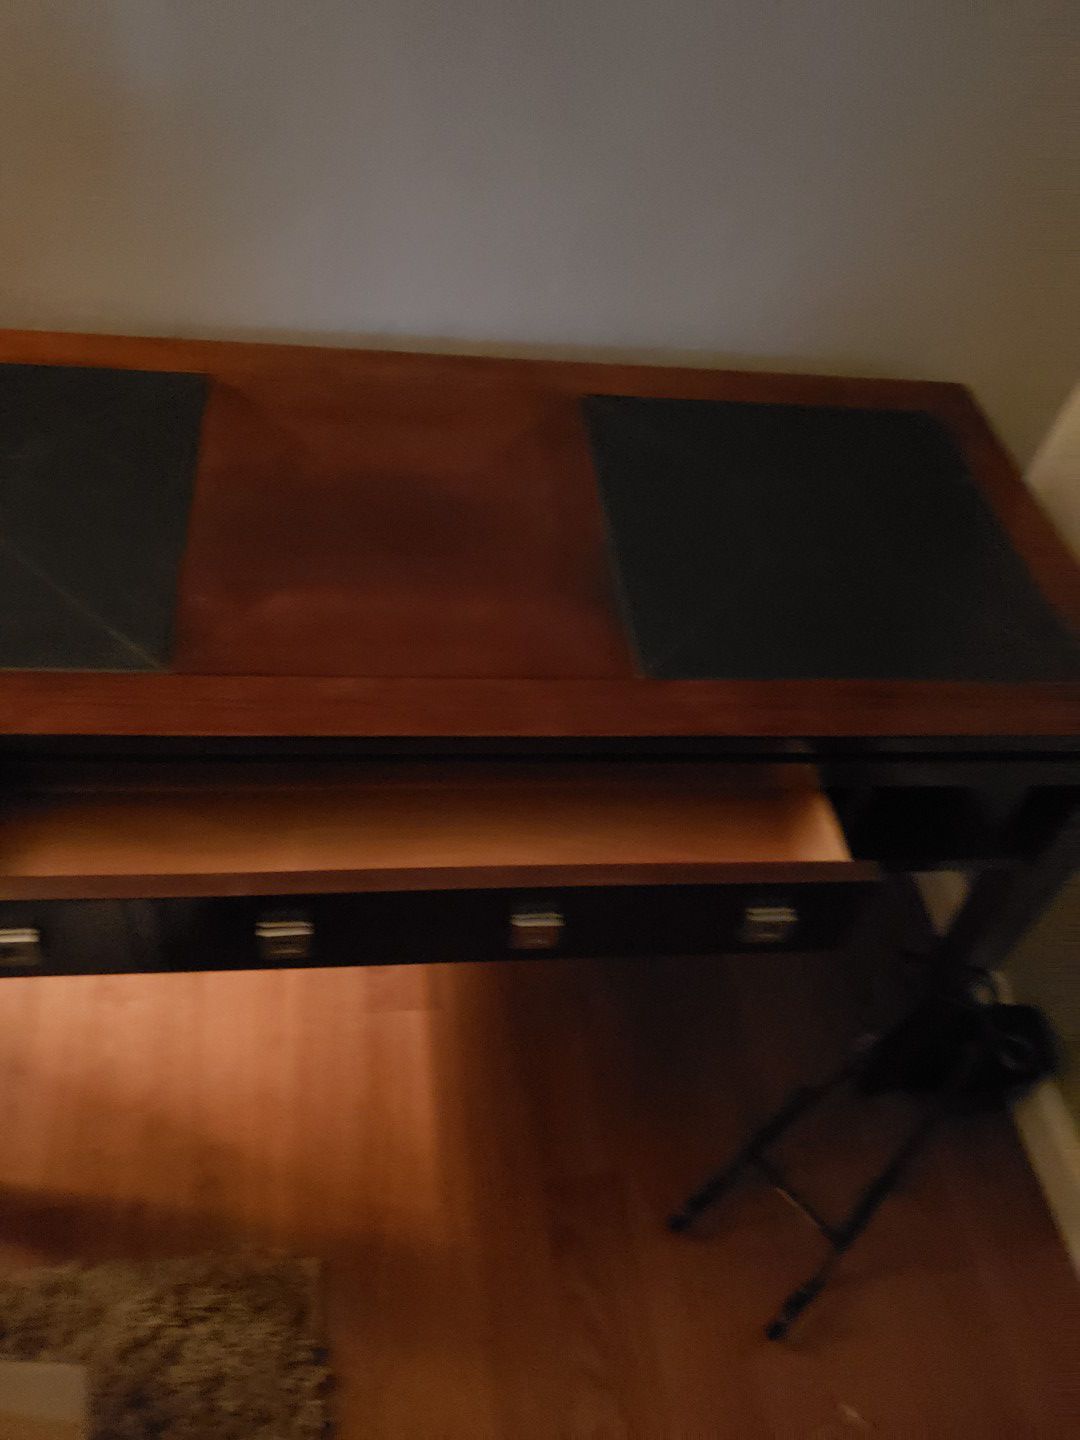 Console table Heavy Nice Condition $85 Obo